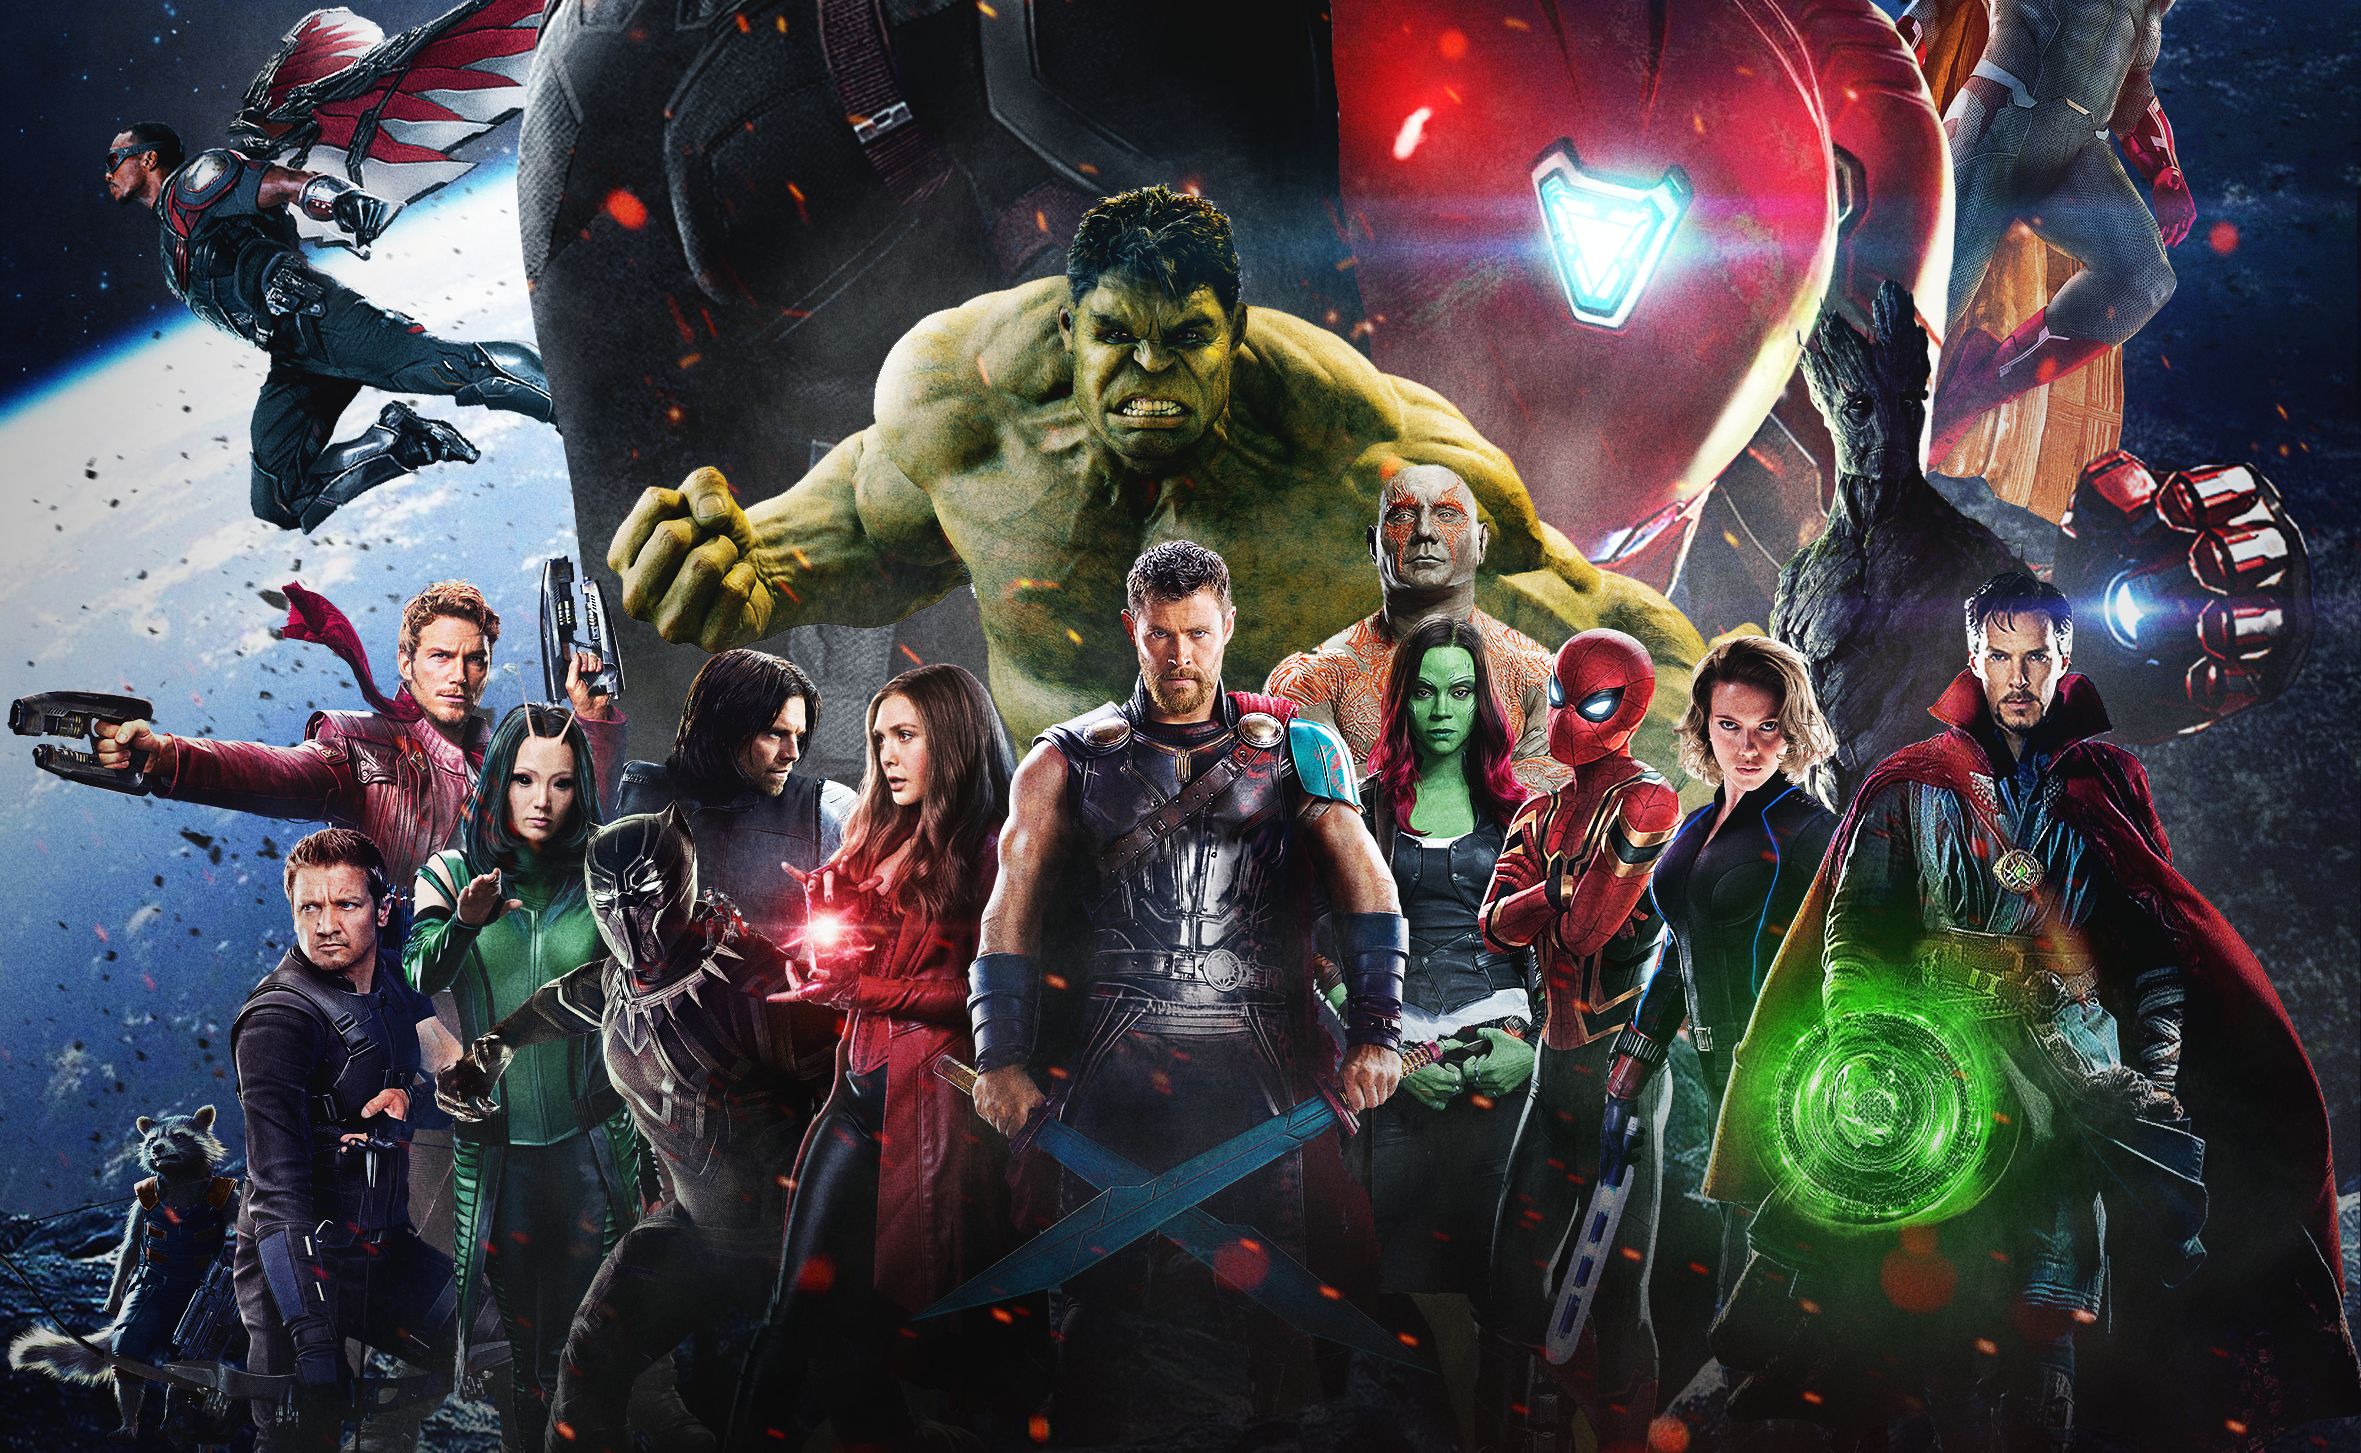 Download mobile wallpaper Spider Man, Hulk, Movie, Black Panther (Marvel Comics), Thor, Black Widow, Hawkeye, The Avengers, Scarlet Witch, Doctor Strange, Falcon (Marvel Comics), Rocket Raccoon, Winter Soldier, Drax The Destroyer, Bucky Barnes, Gamora, Groot, Peter Quill, Mantis (Marvel Comics), Avengers: Infinity War for free.